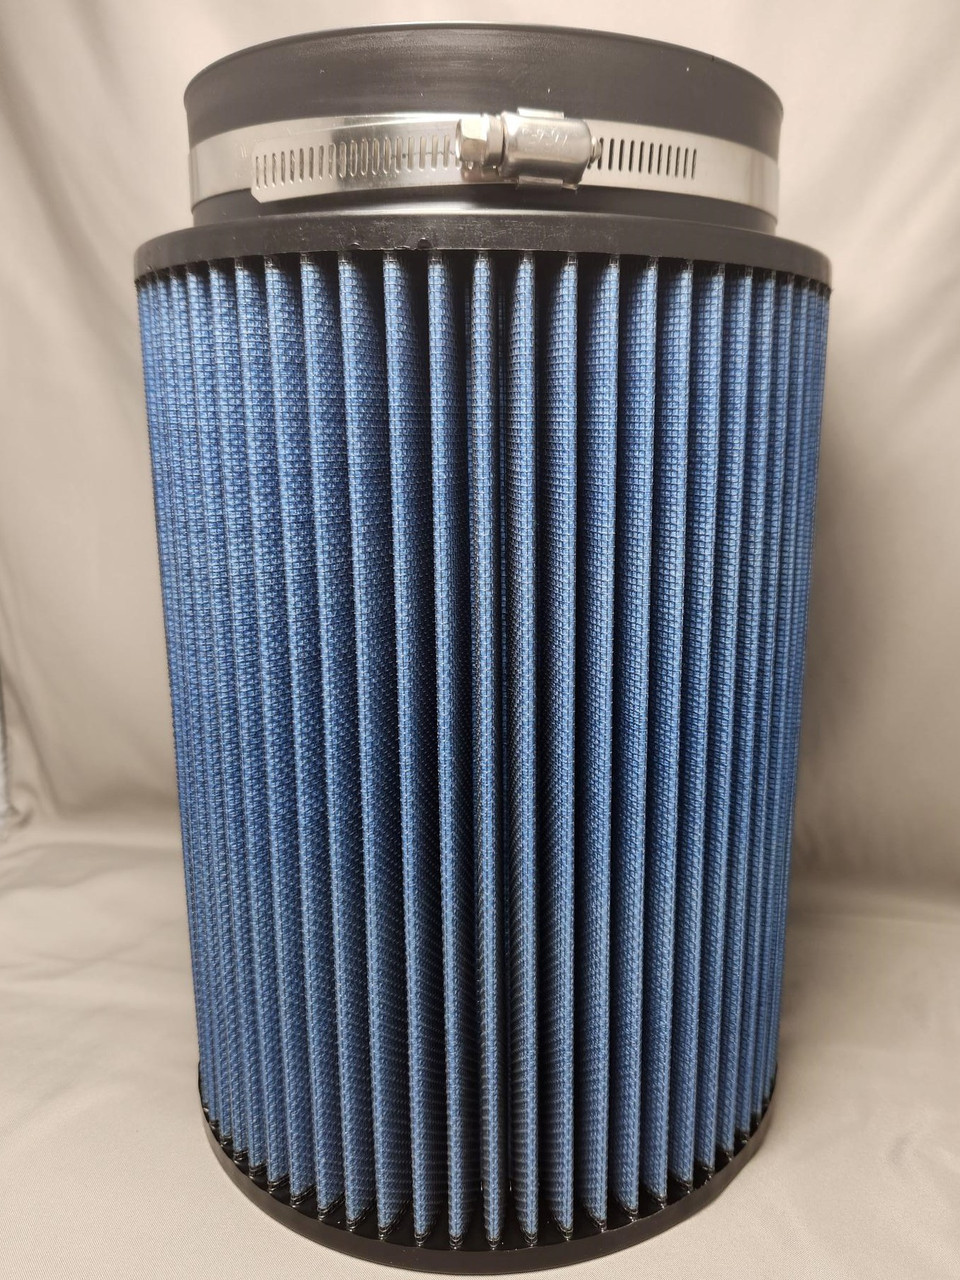 MAN Replacement Walker Style Filter 1000917B,1005438B OR SP2740CGB
We offer 2 lengths SP2740-300 or SP2740-400 for HP MAN engines